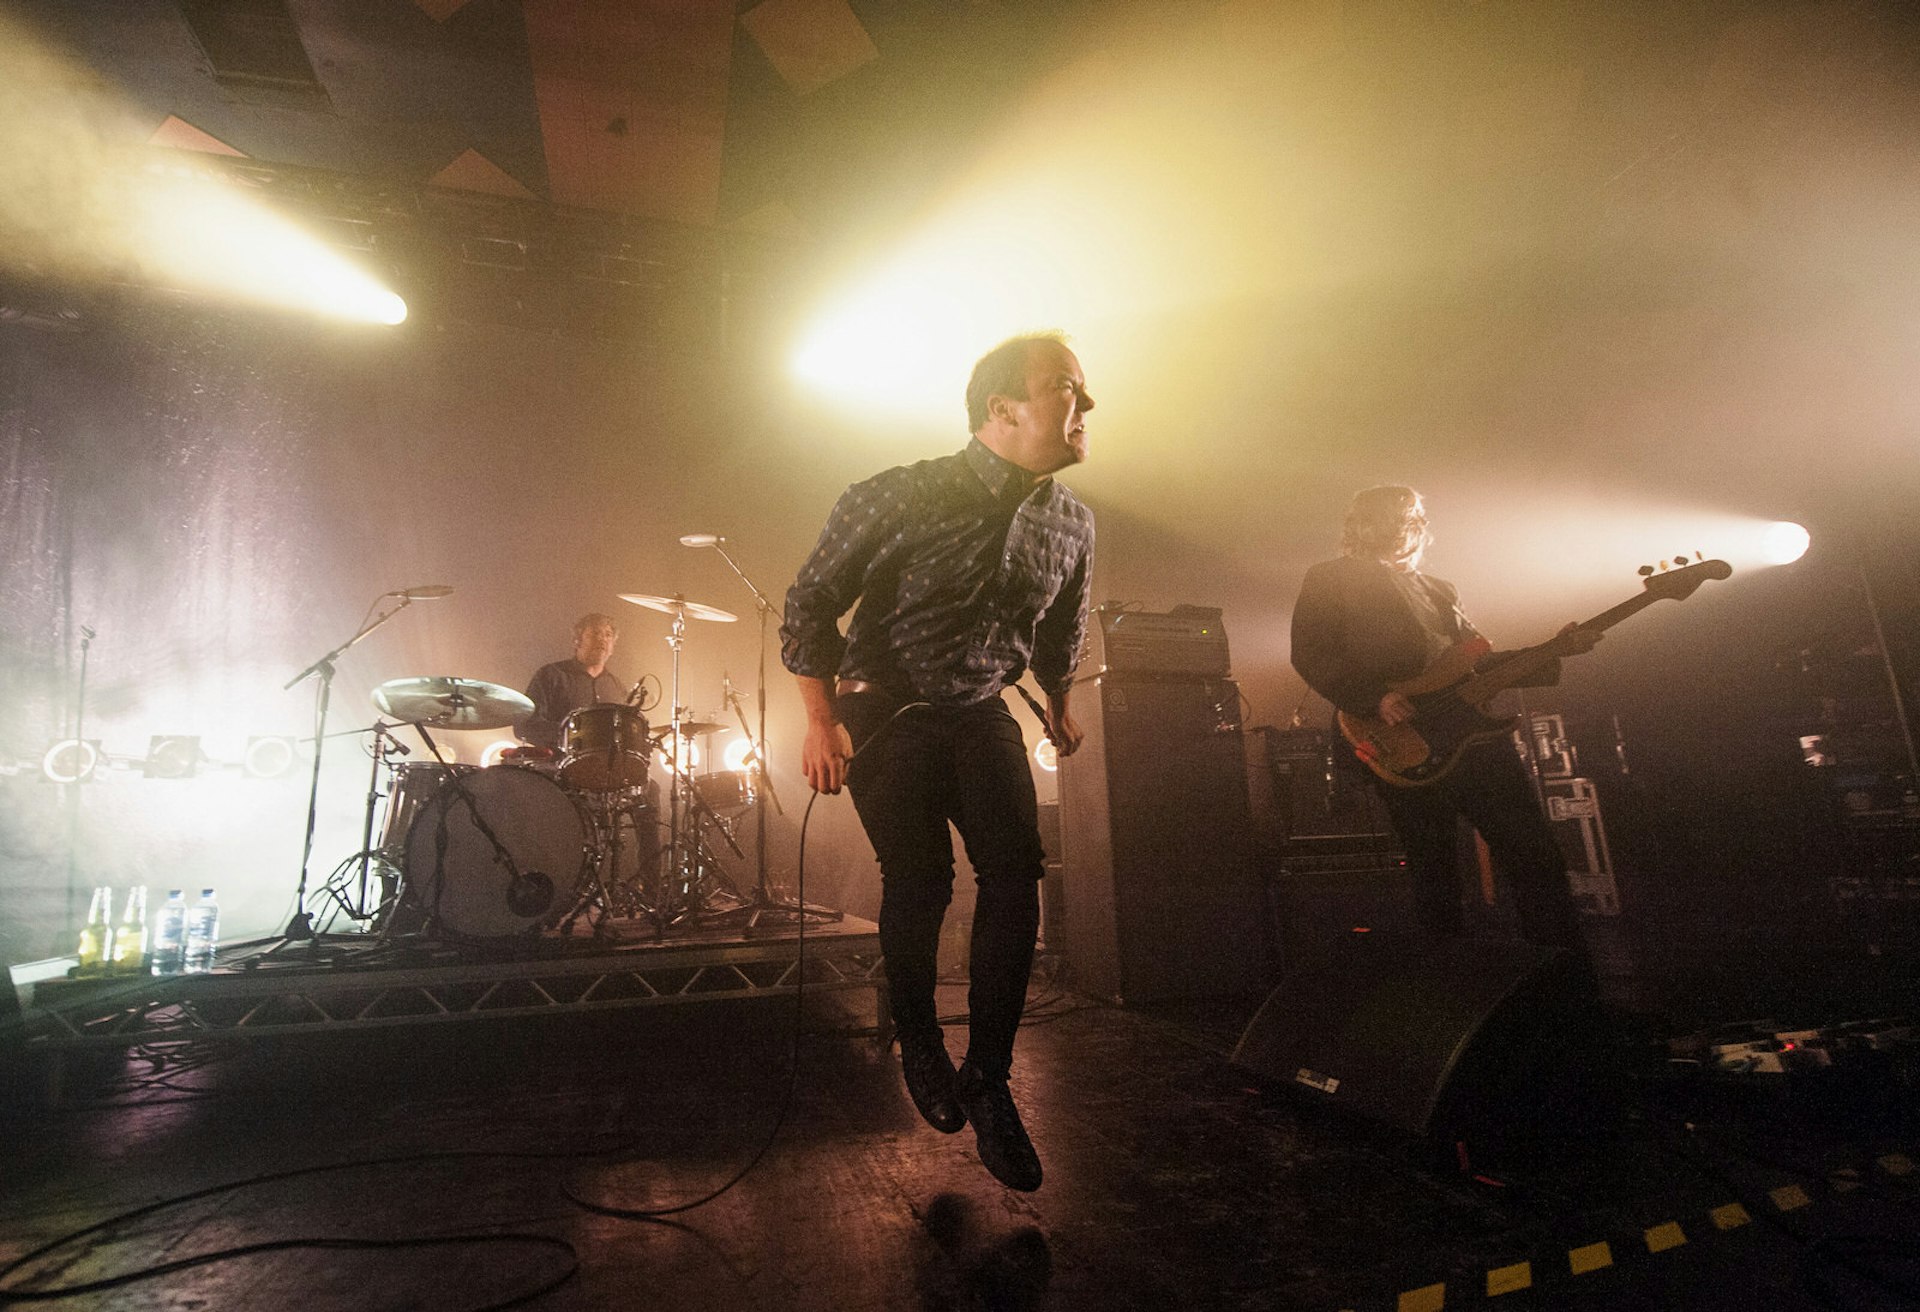 Future Islands perform at Glasgow's legendary Barrowland Ballroom © Ross Gilmore / Redferns / Getty Images